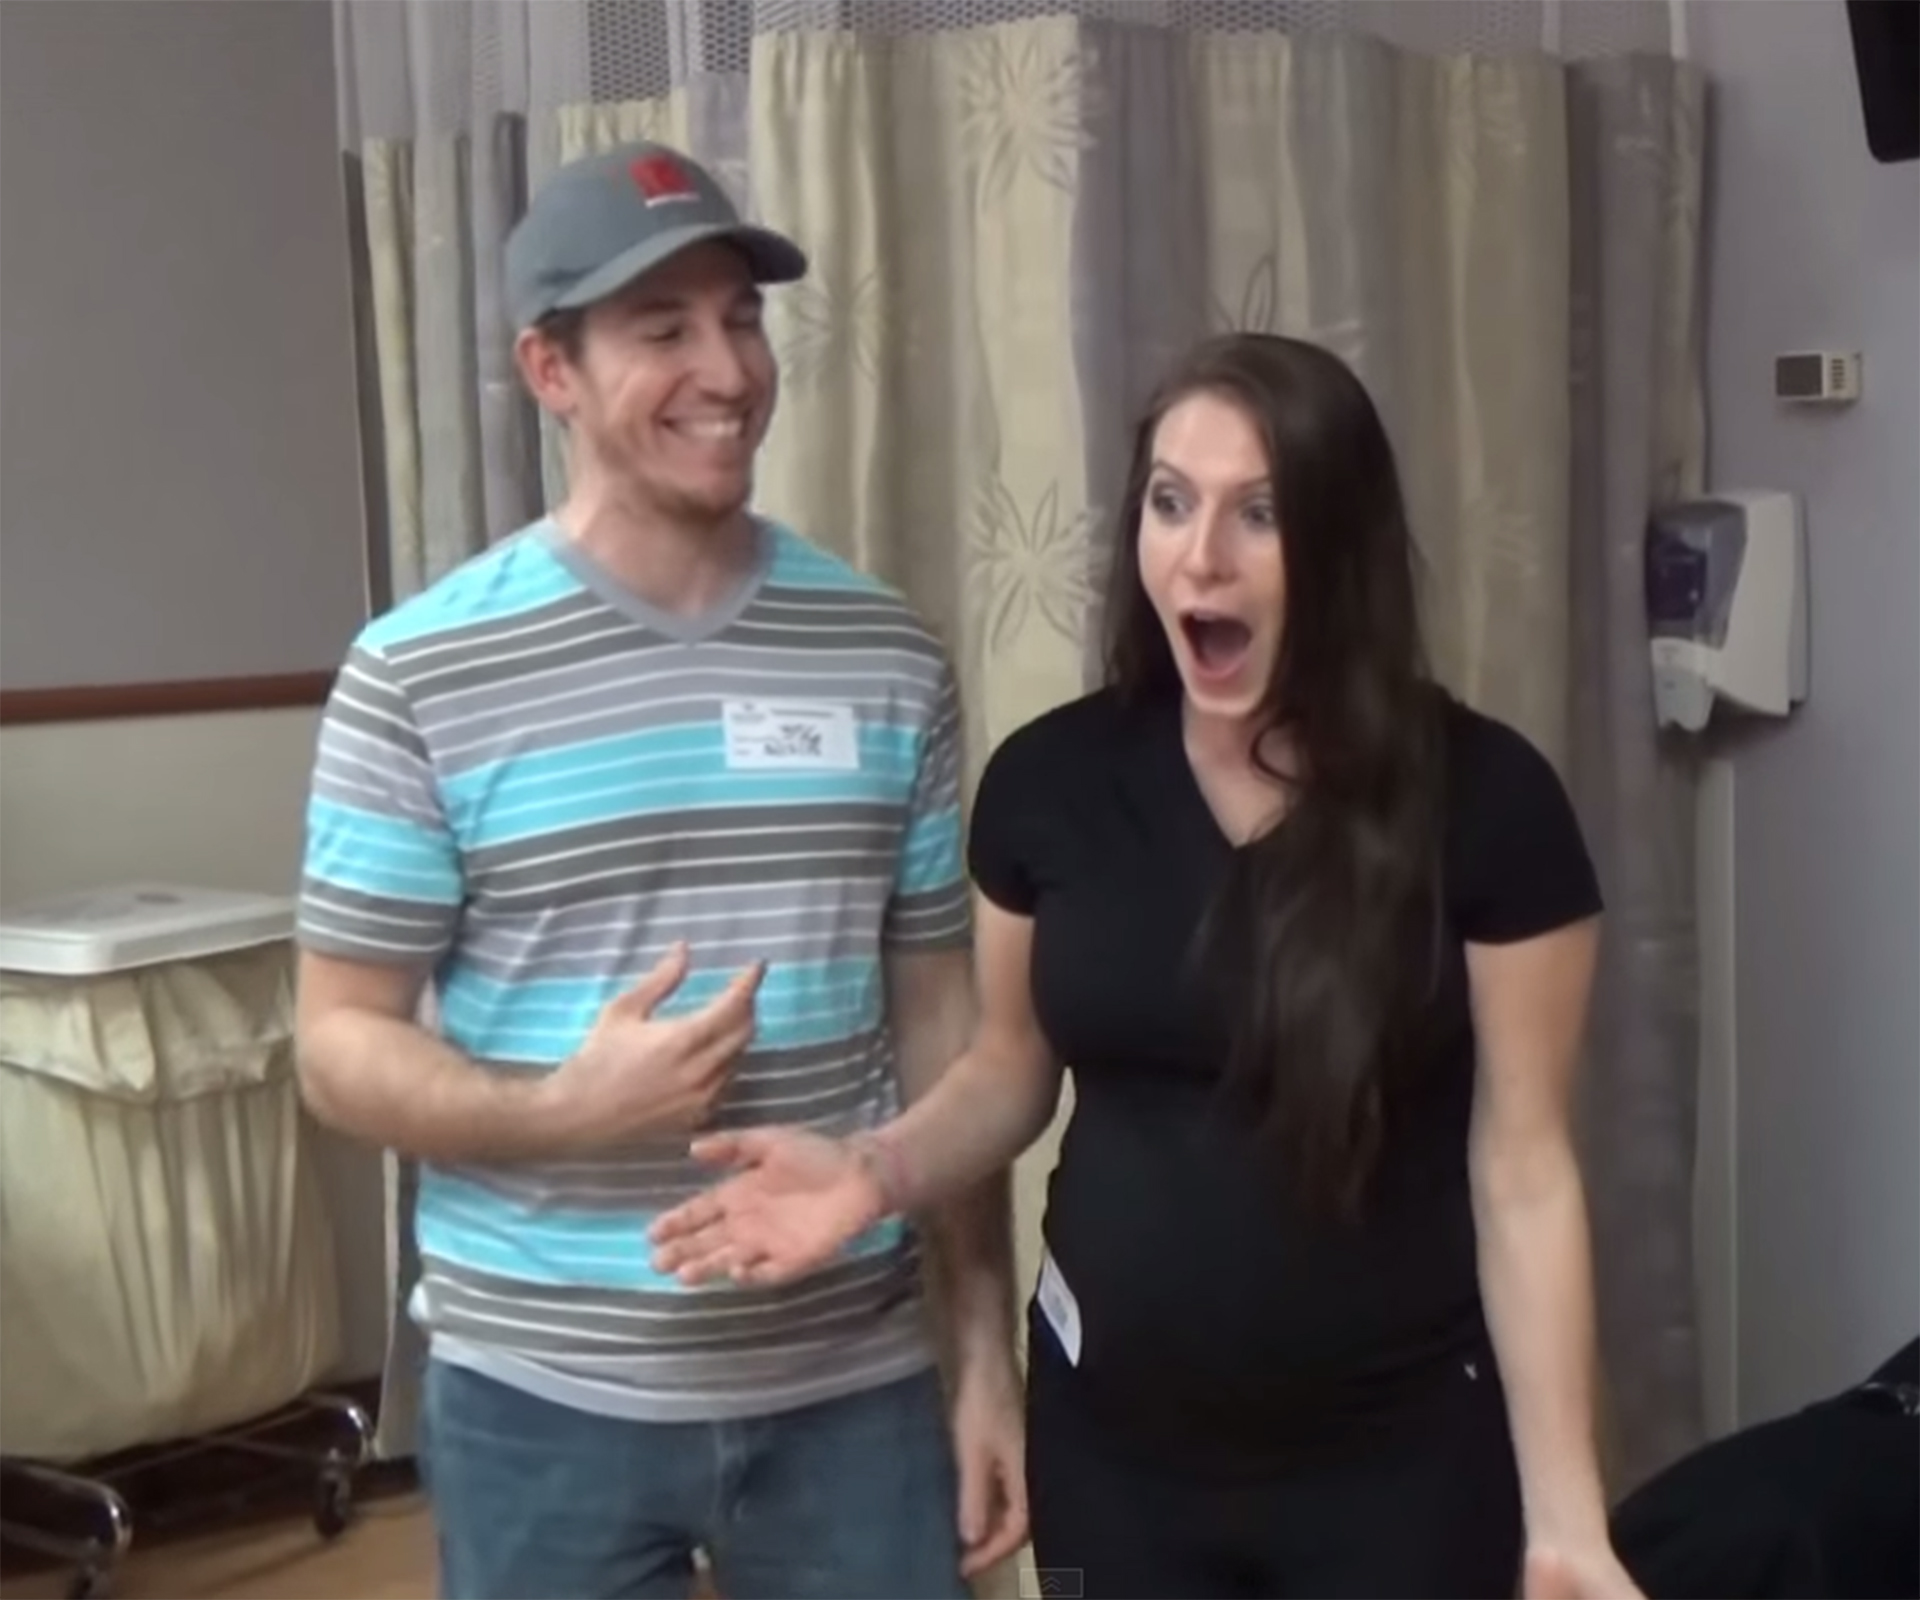 WATCH: Friends and family react to couple’s surprise twins